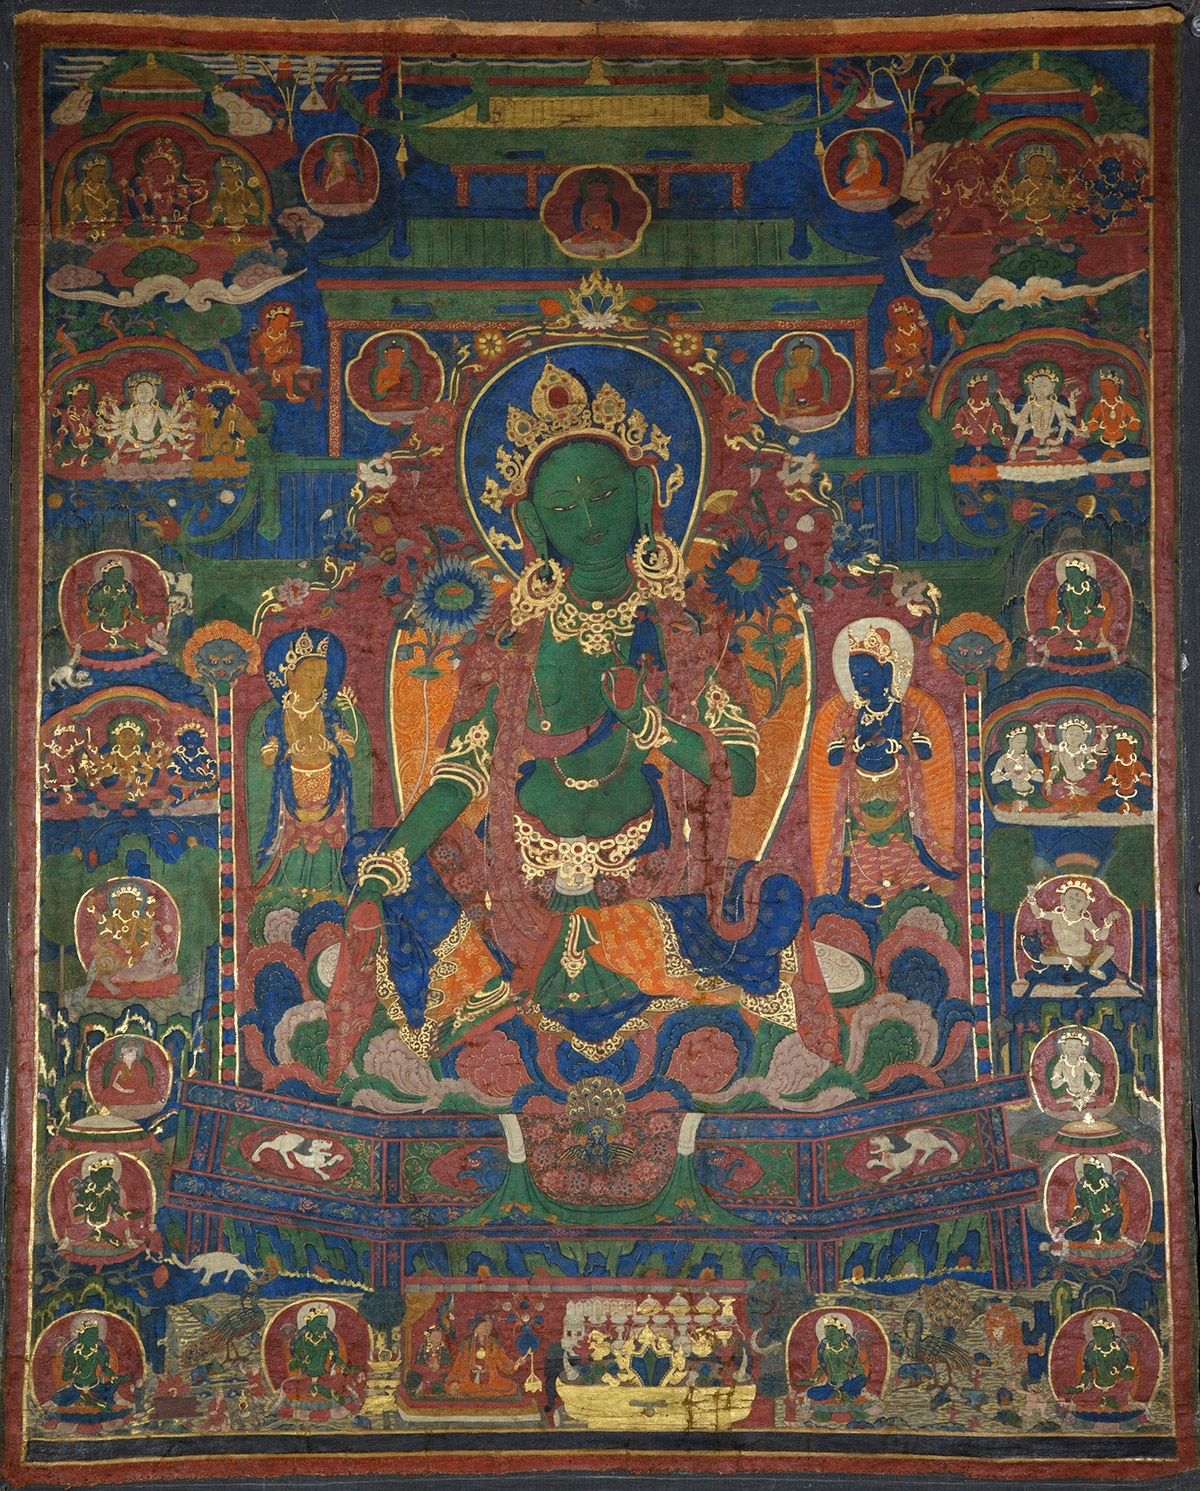 Green Tara. 16th century. Tsang (South-Central Tibet) or U (Central Tibet). Pigments on cloth. MU-CIV/MAO "Giuseppe Tucci," inv. 886/719. Image courtesy of the Museum of Civilisation/Museum of Oriental Art "Giuseppe Tucci," Rome.